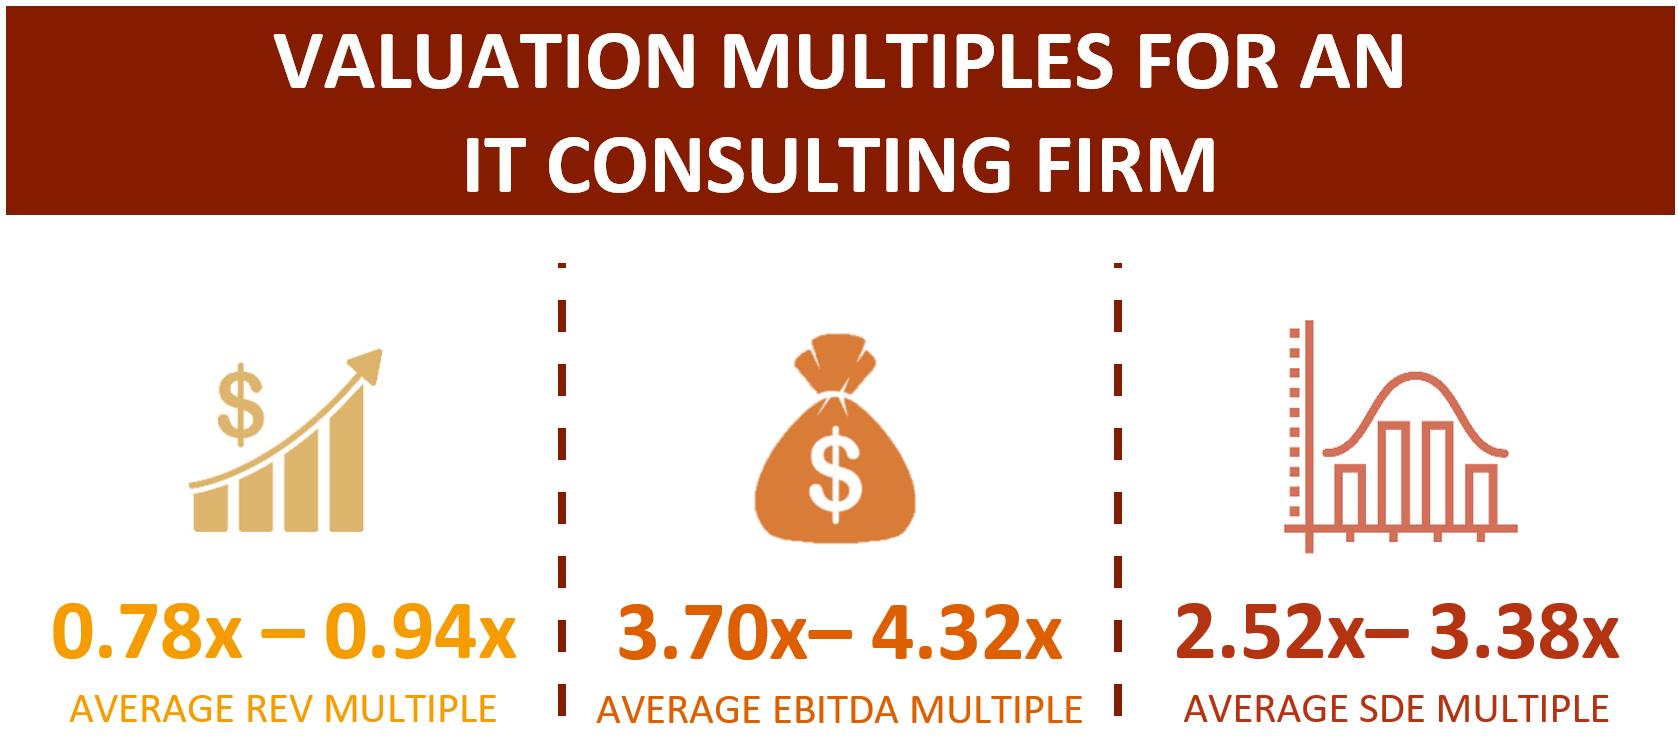 Market Multiples For An IT Consulting Firm